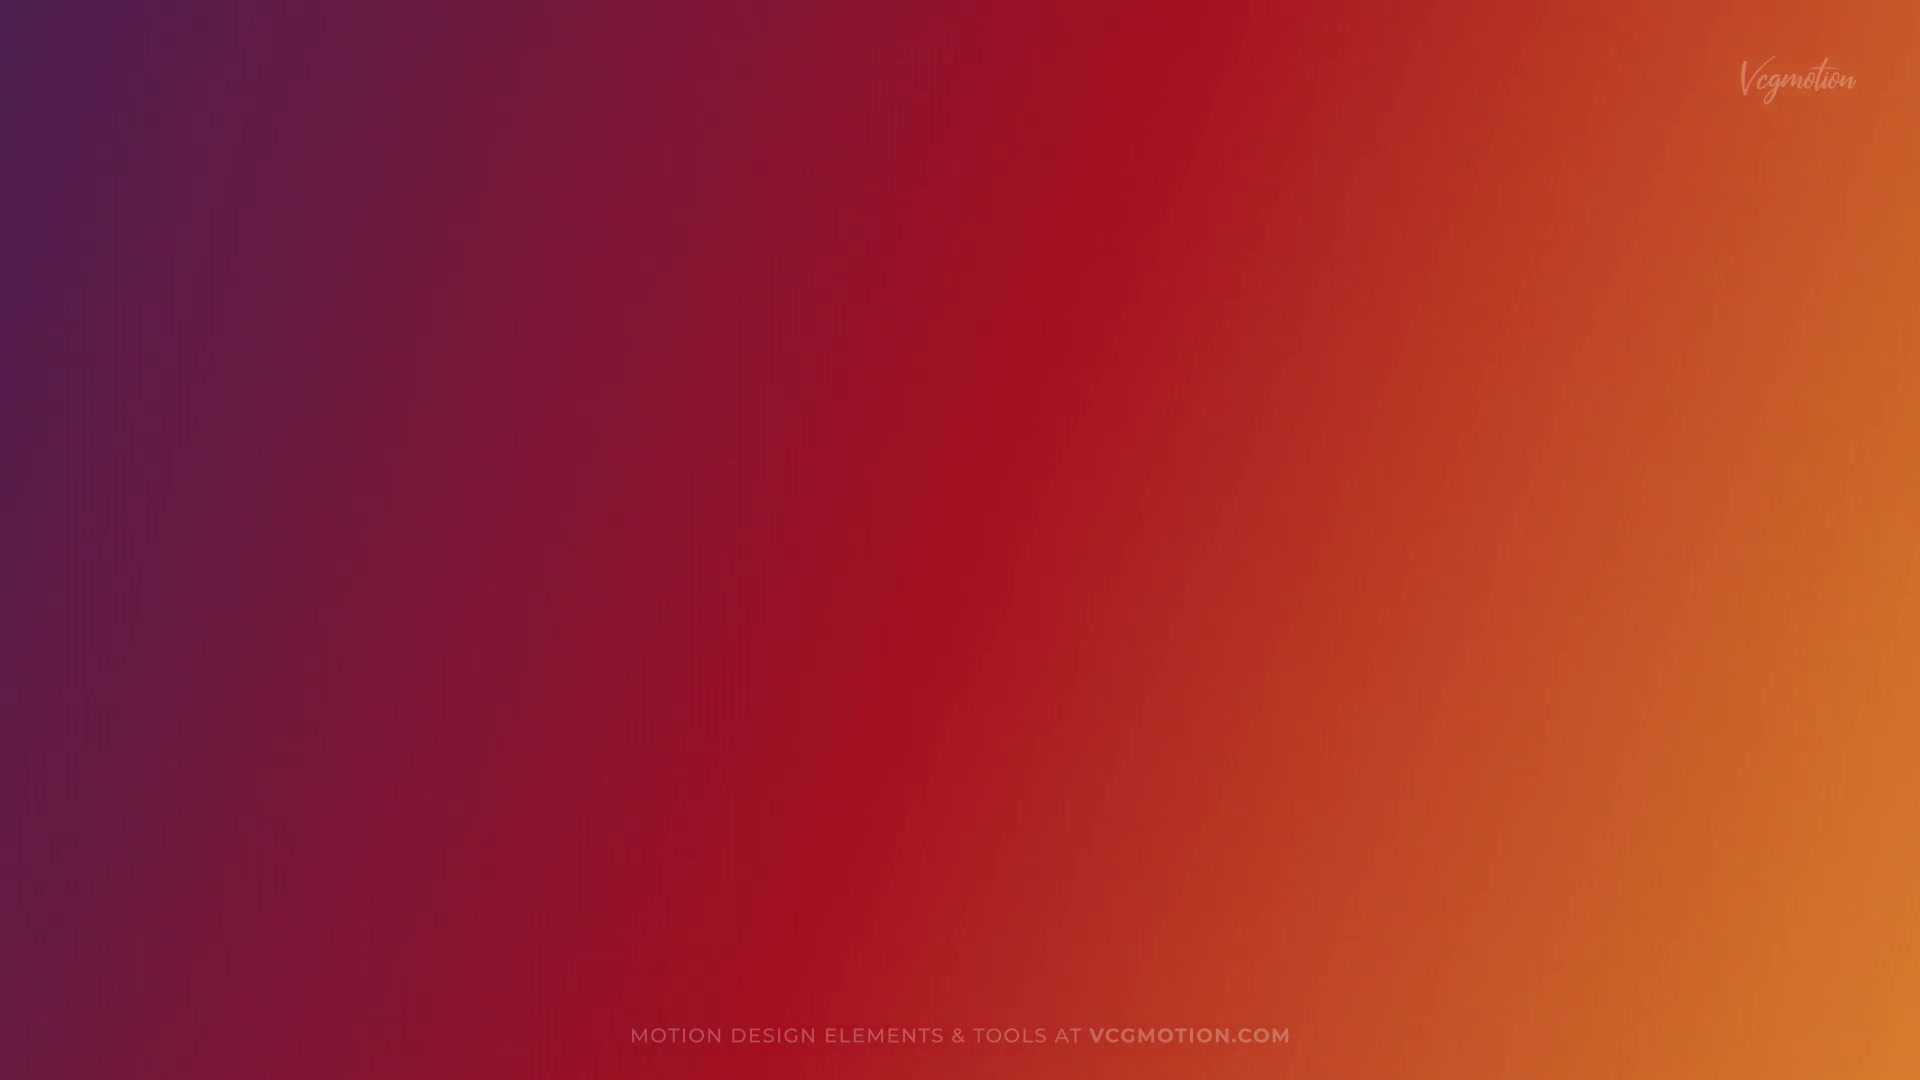 gradient ramp after effects cs4 free download